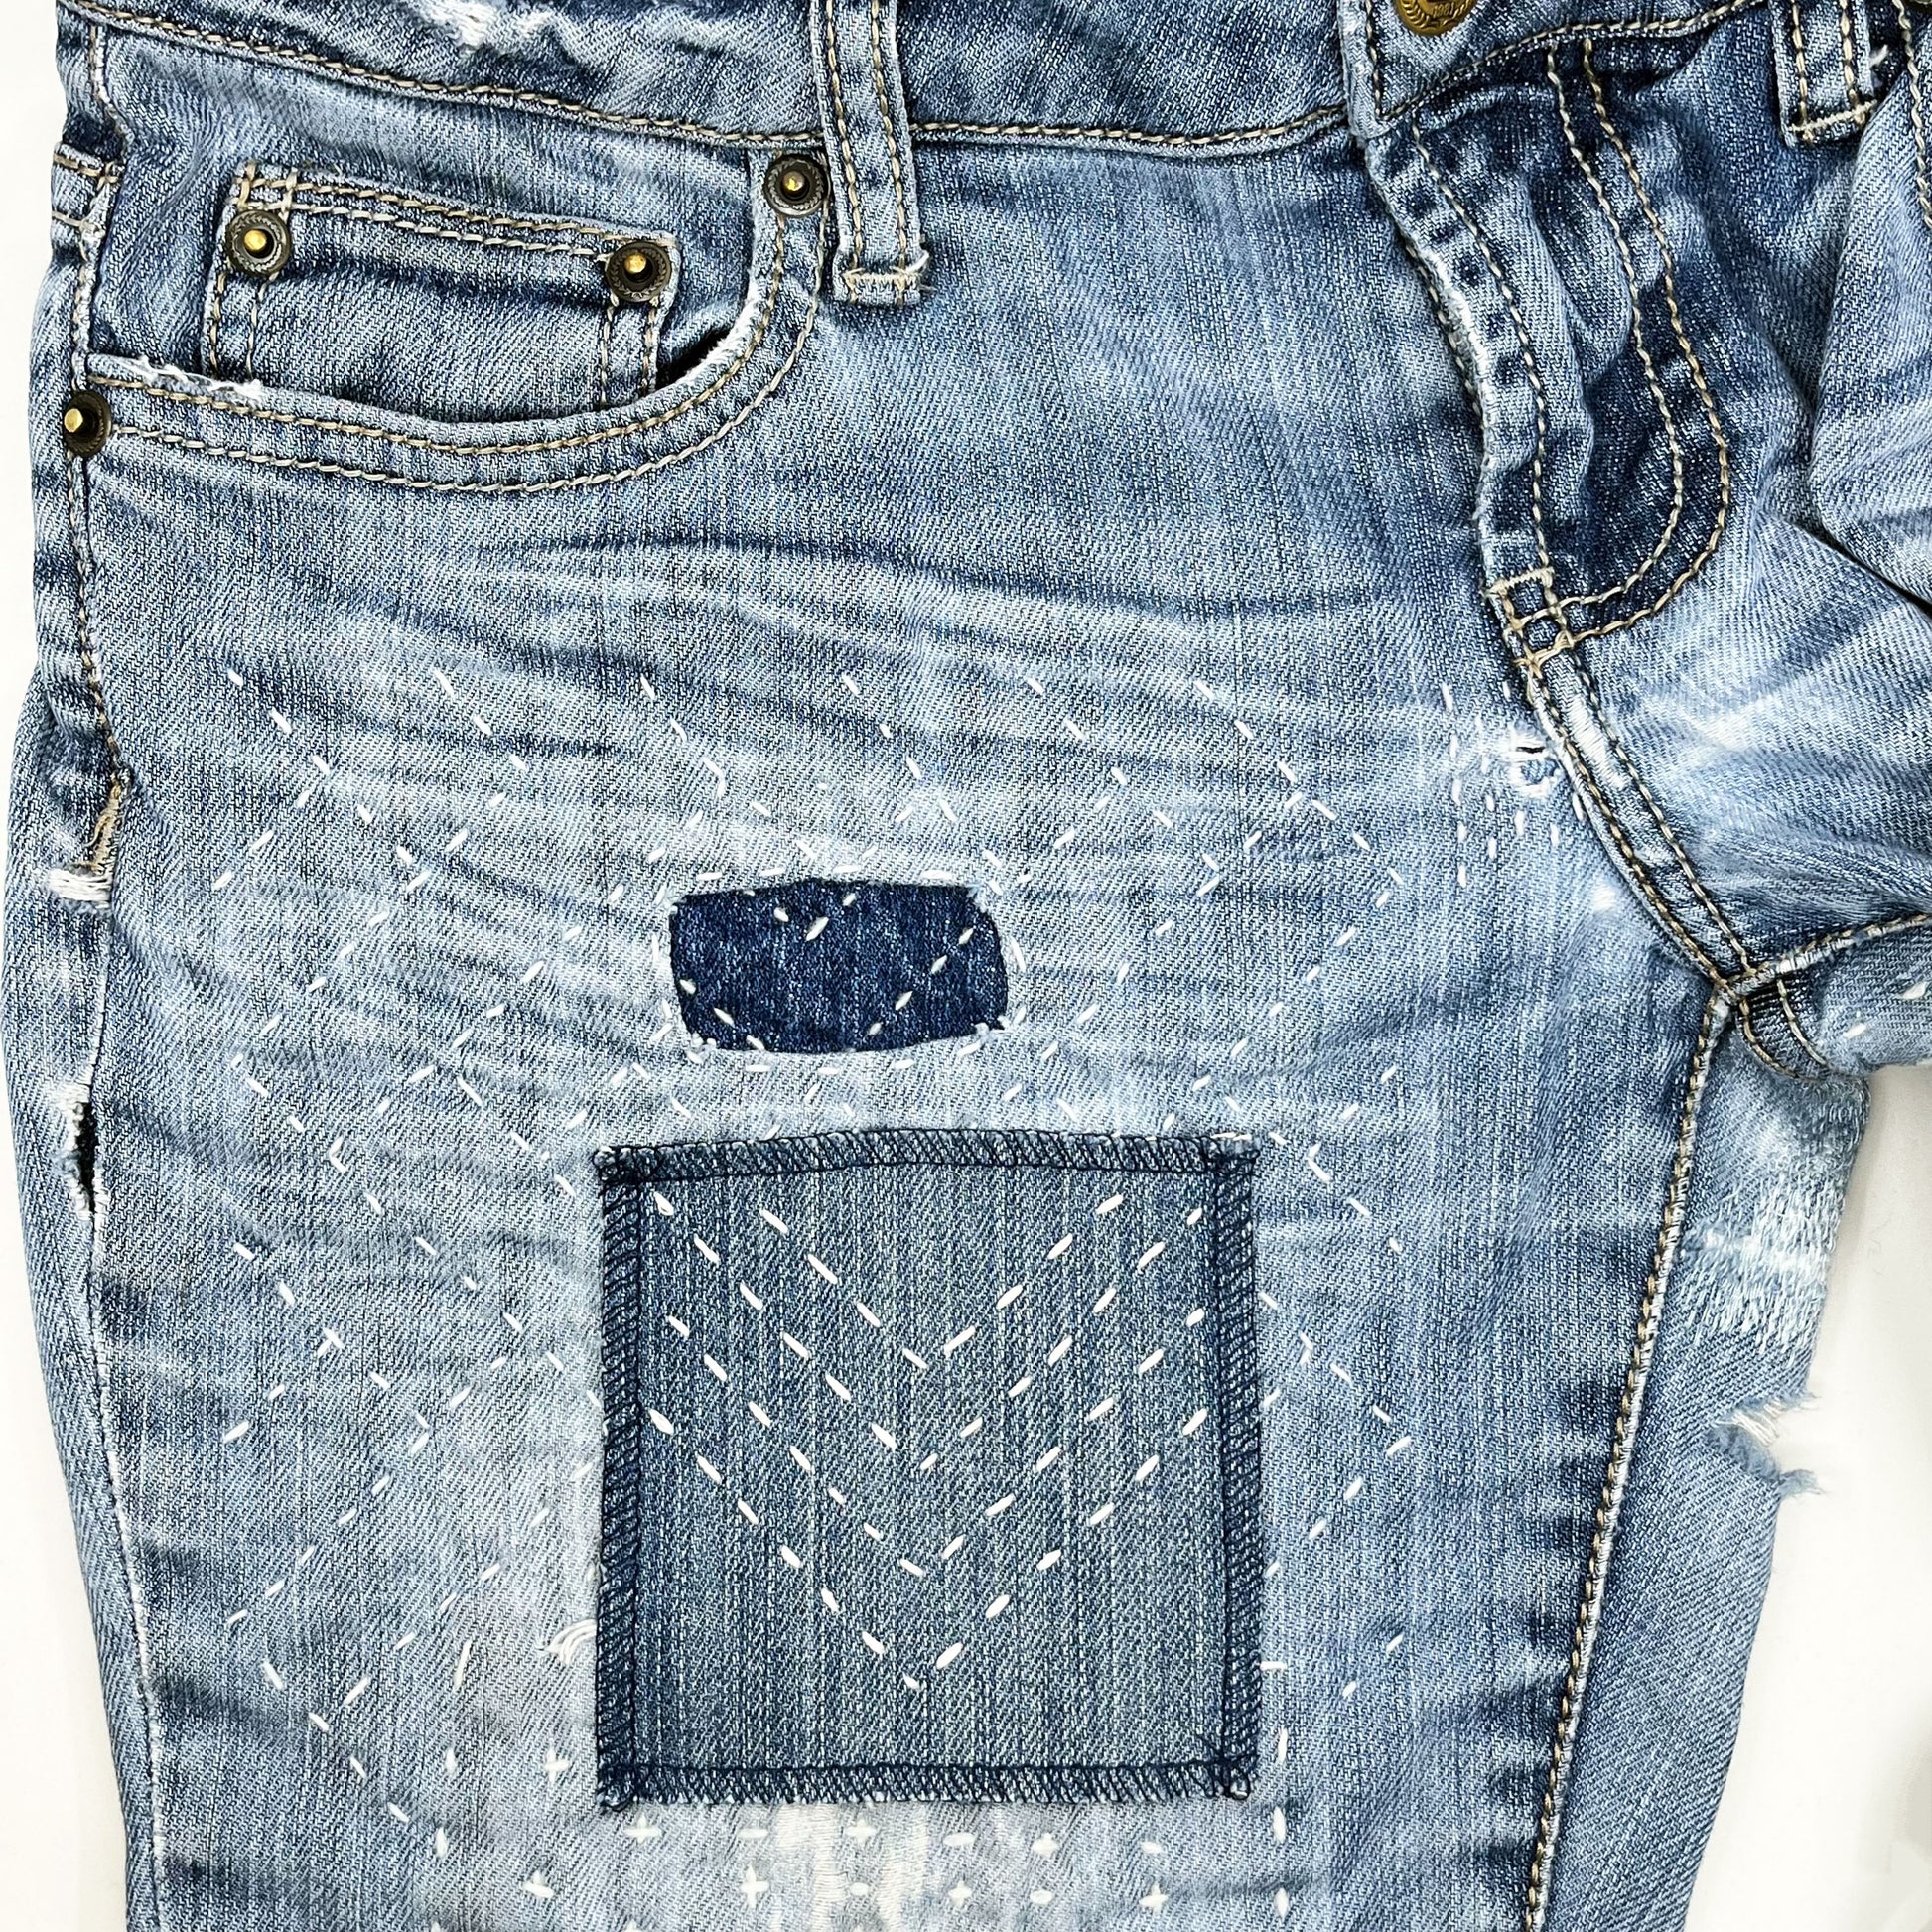 a square patch made out of denim, handstitched with rows of ivory running stitches in a chevron pattern, with overlocked edges, on a pair of jeans with other visible mending